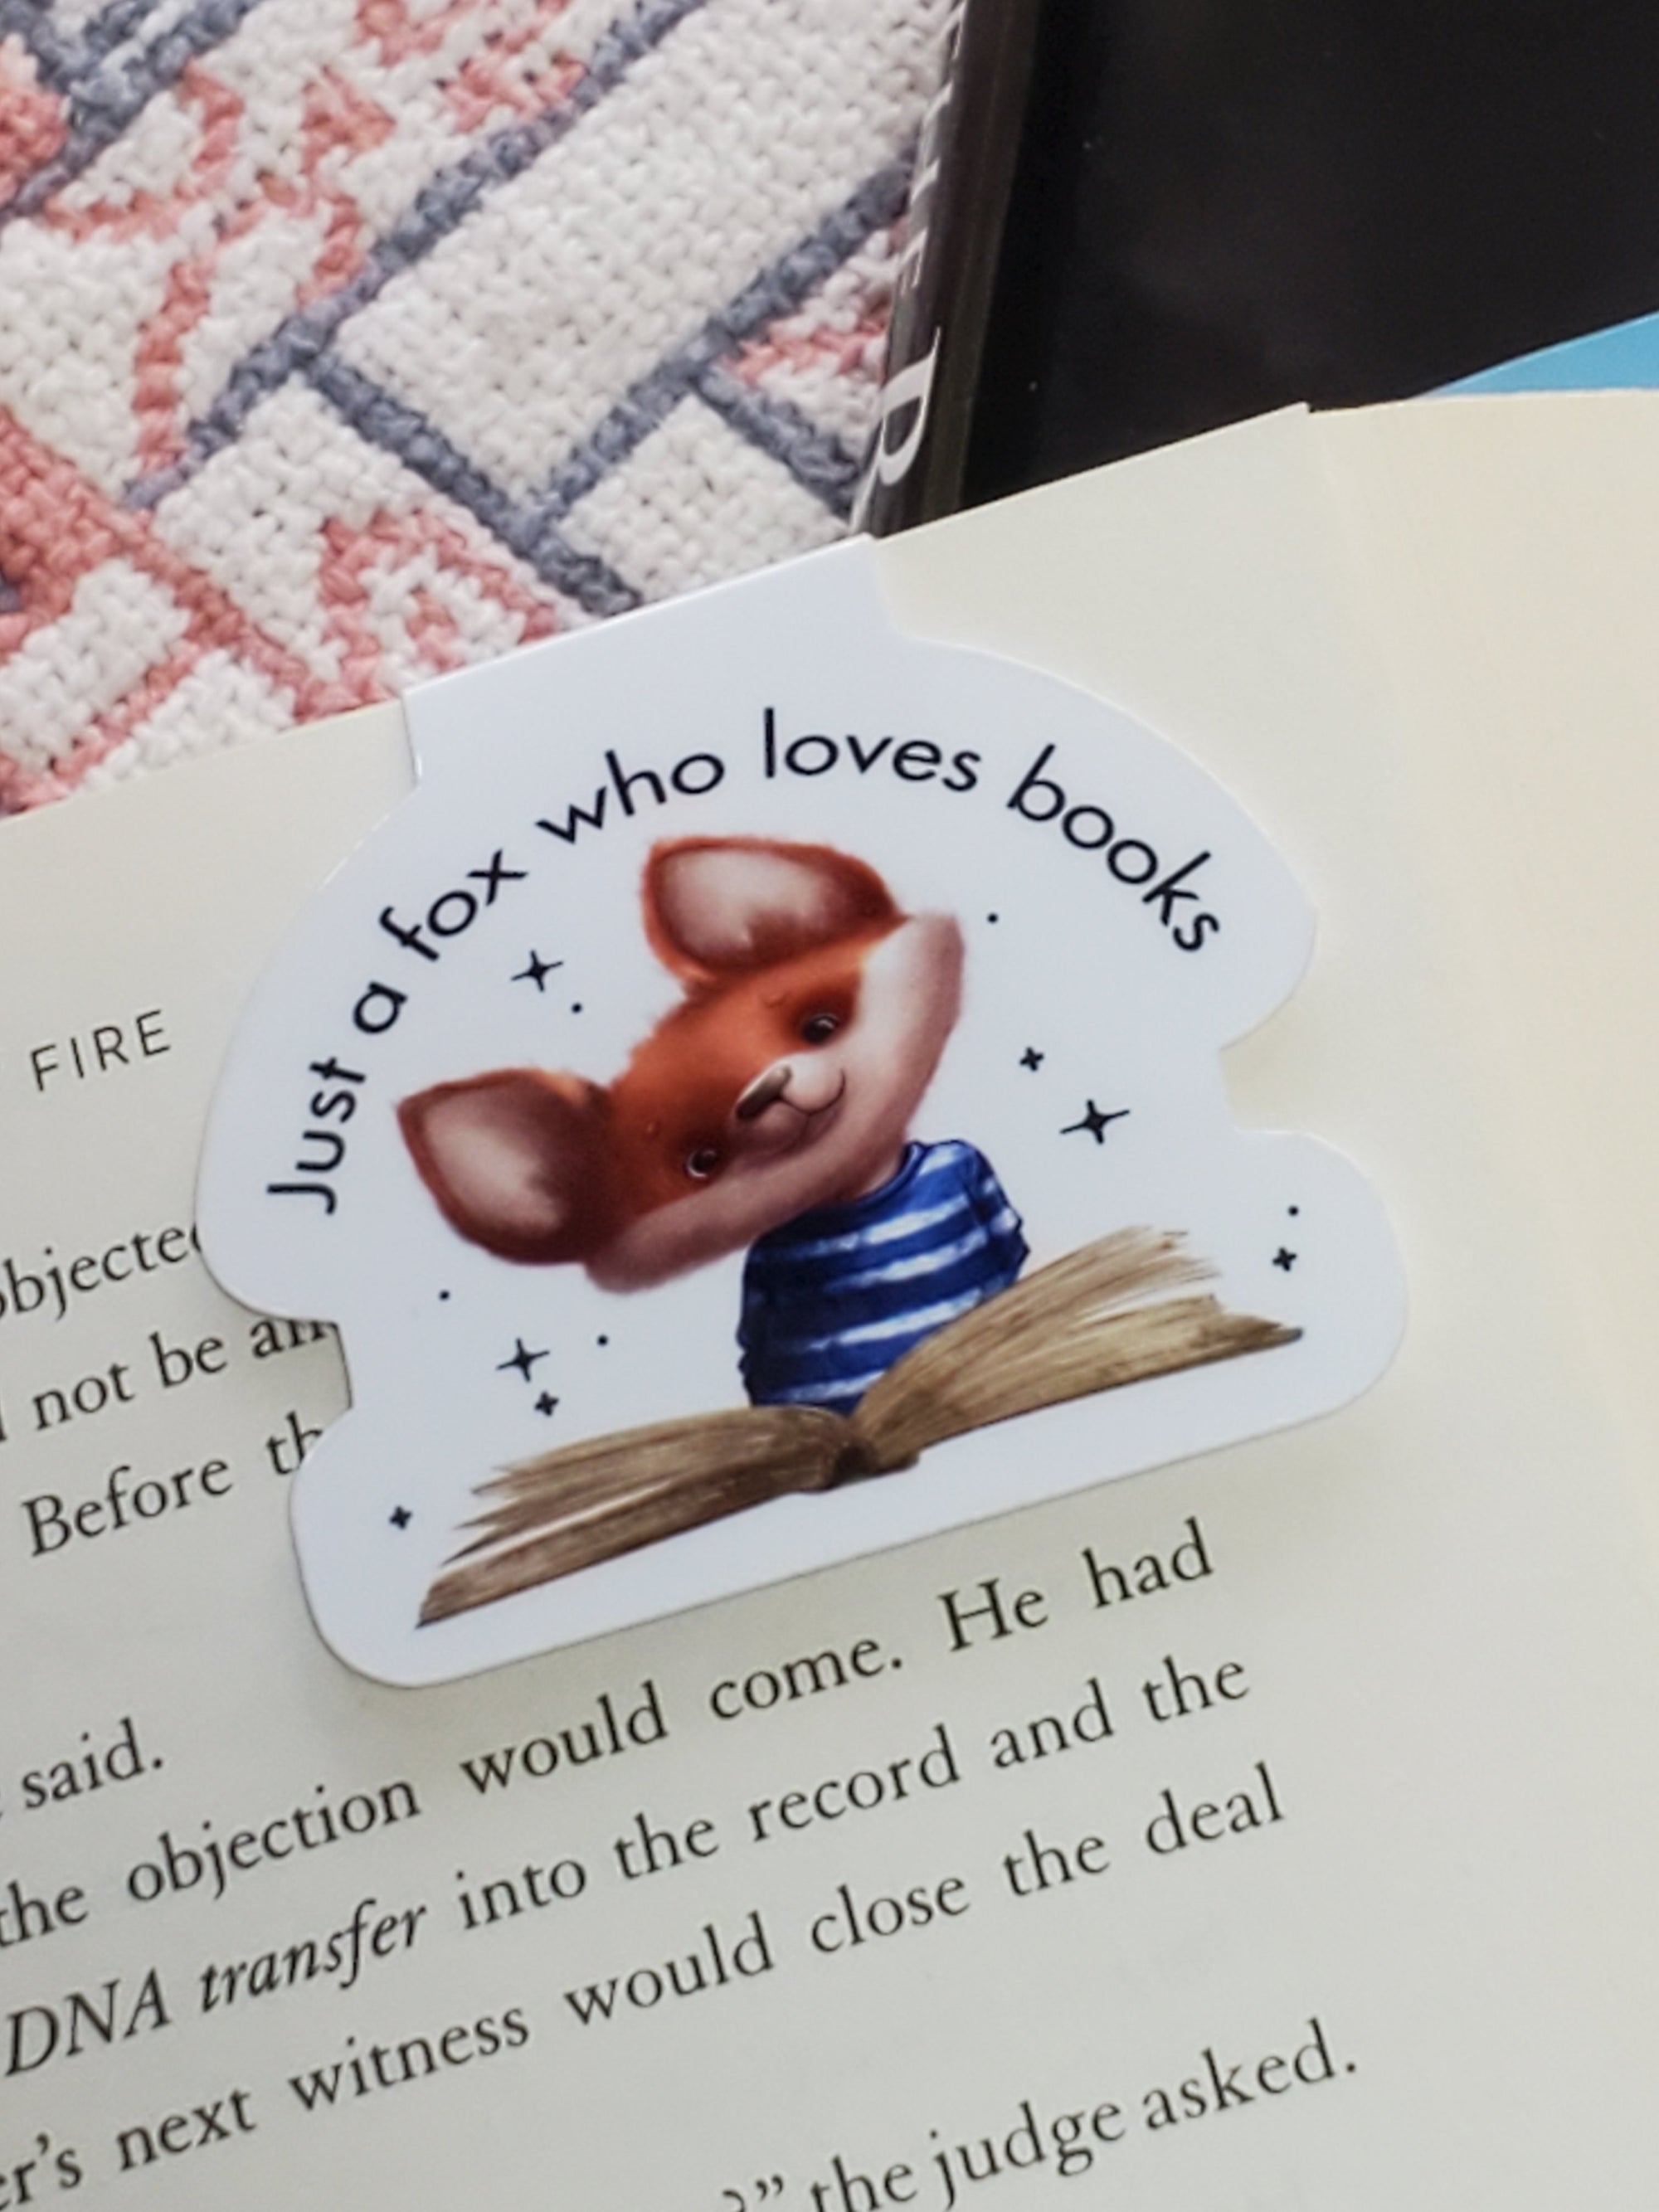 Just a Fox Who Loves Books Magnetic Bookmark